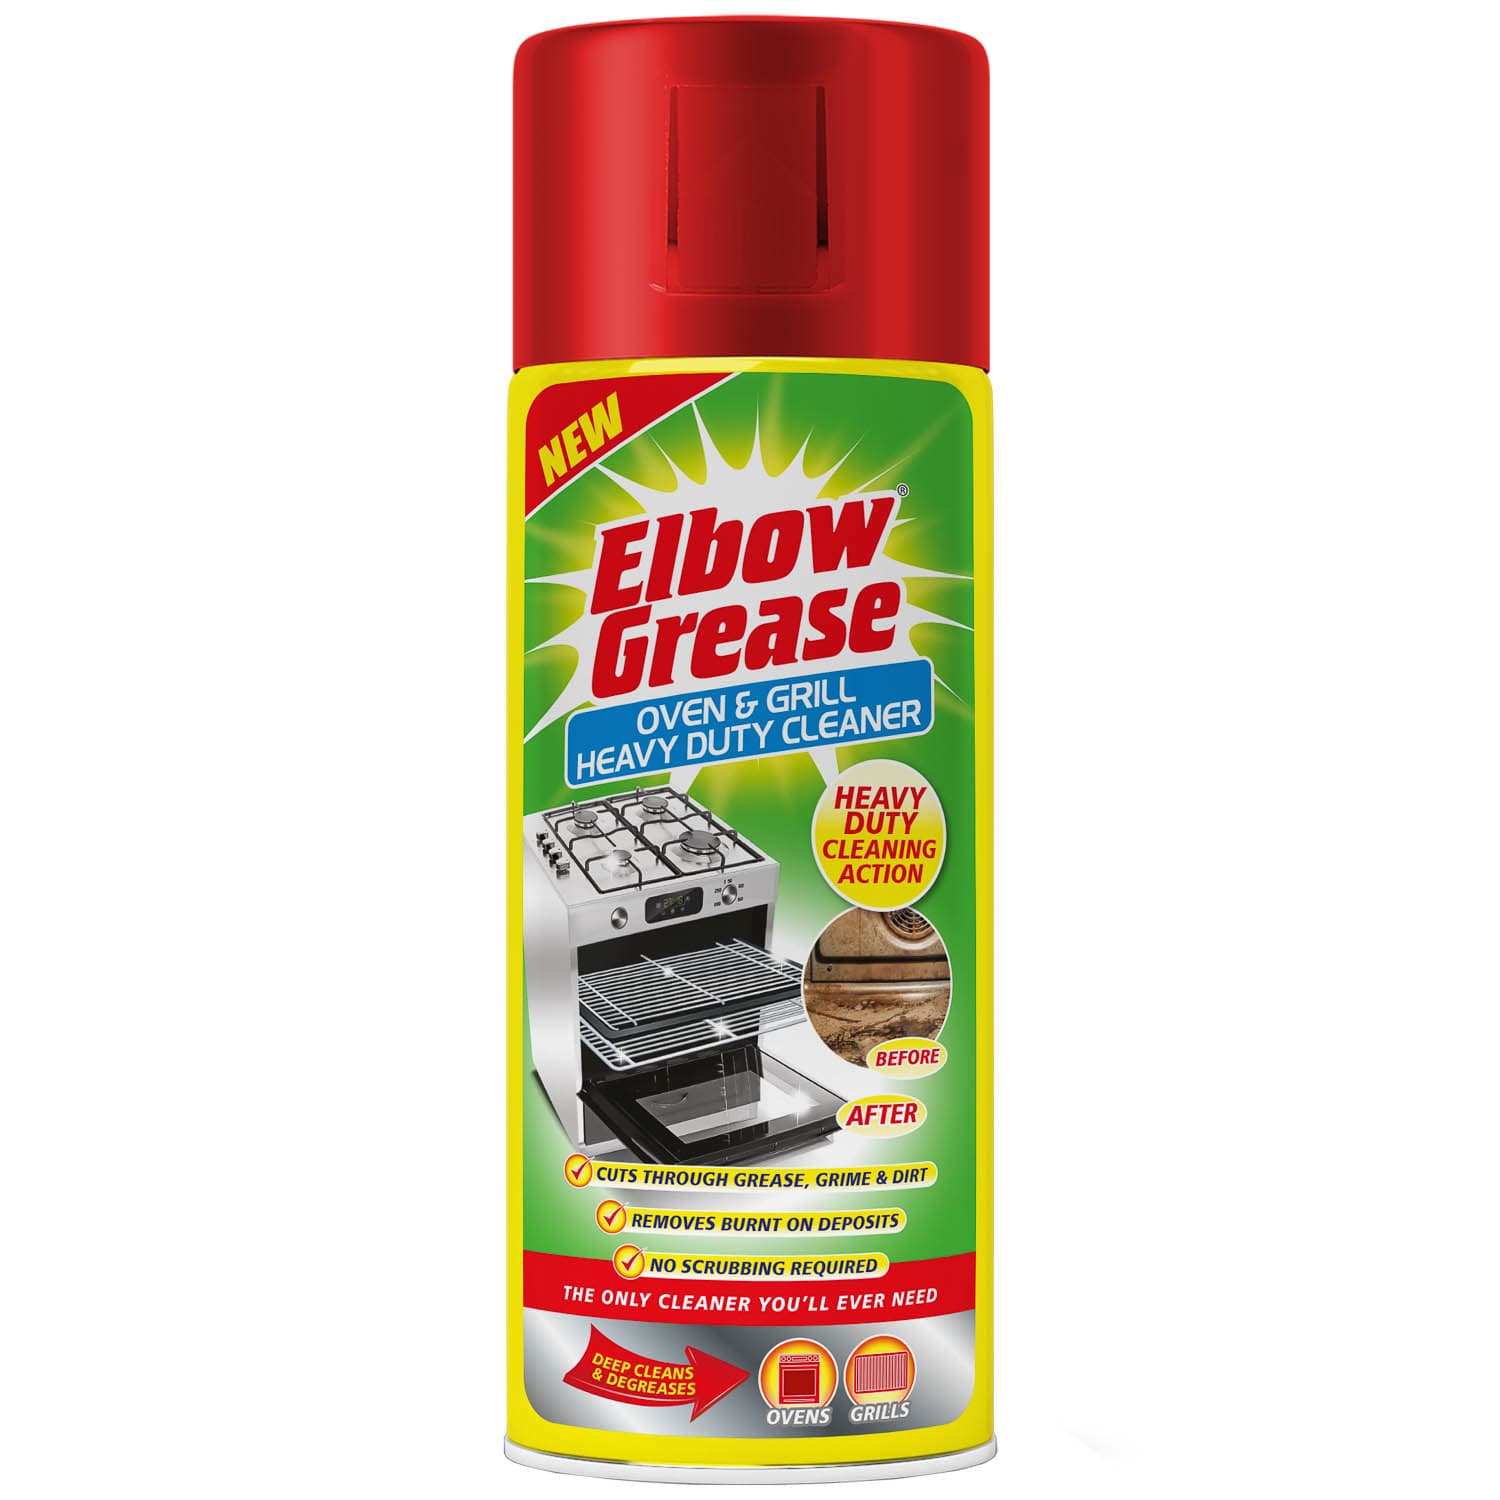 https://www.bmstores.co.uk/images/hpcProductImage/imgSource/391481-elbow-grease-oven-and-grill-heavy-duty-cleaner.jpg